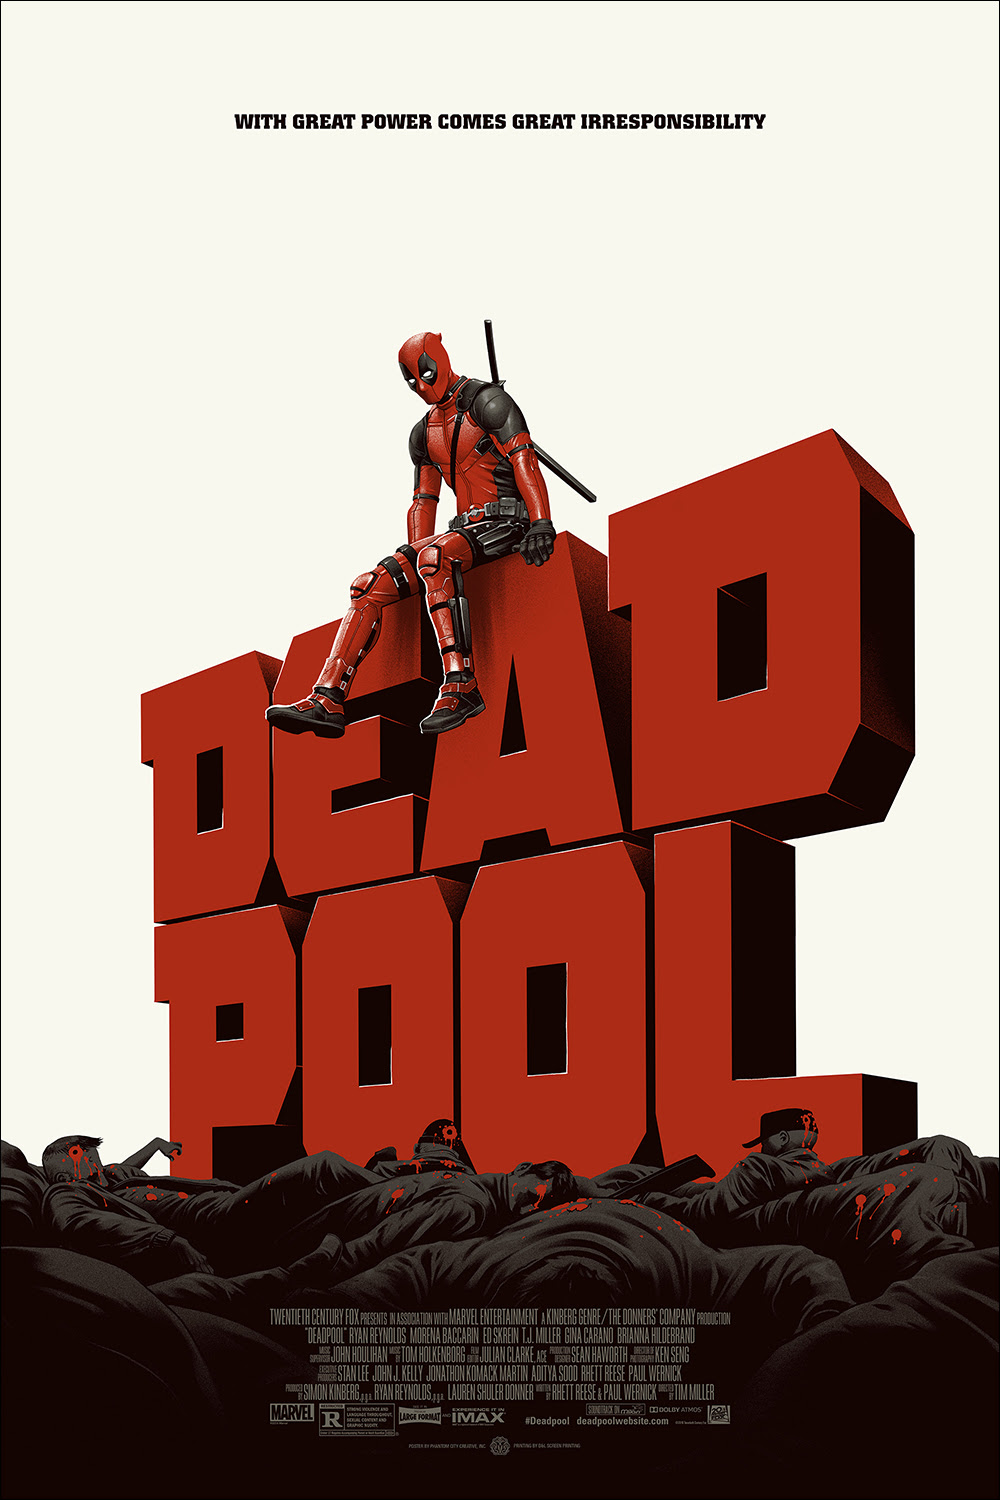 Deadpool (Version 1) by Phantom City Creative. 24"x36" screen print. Hand numbered. Edition of 275. Printed by D&L Screenprinting. $45